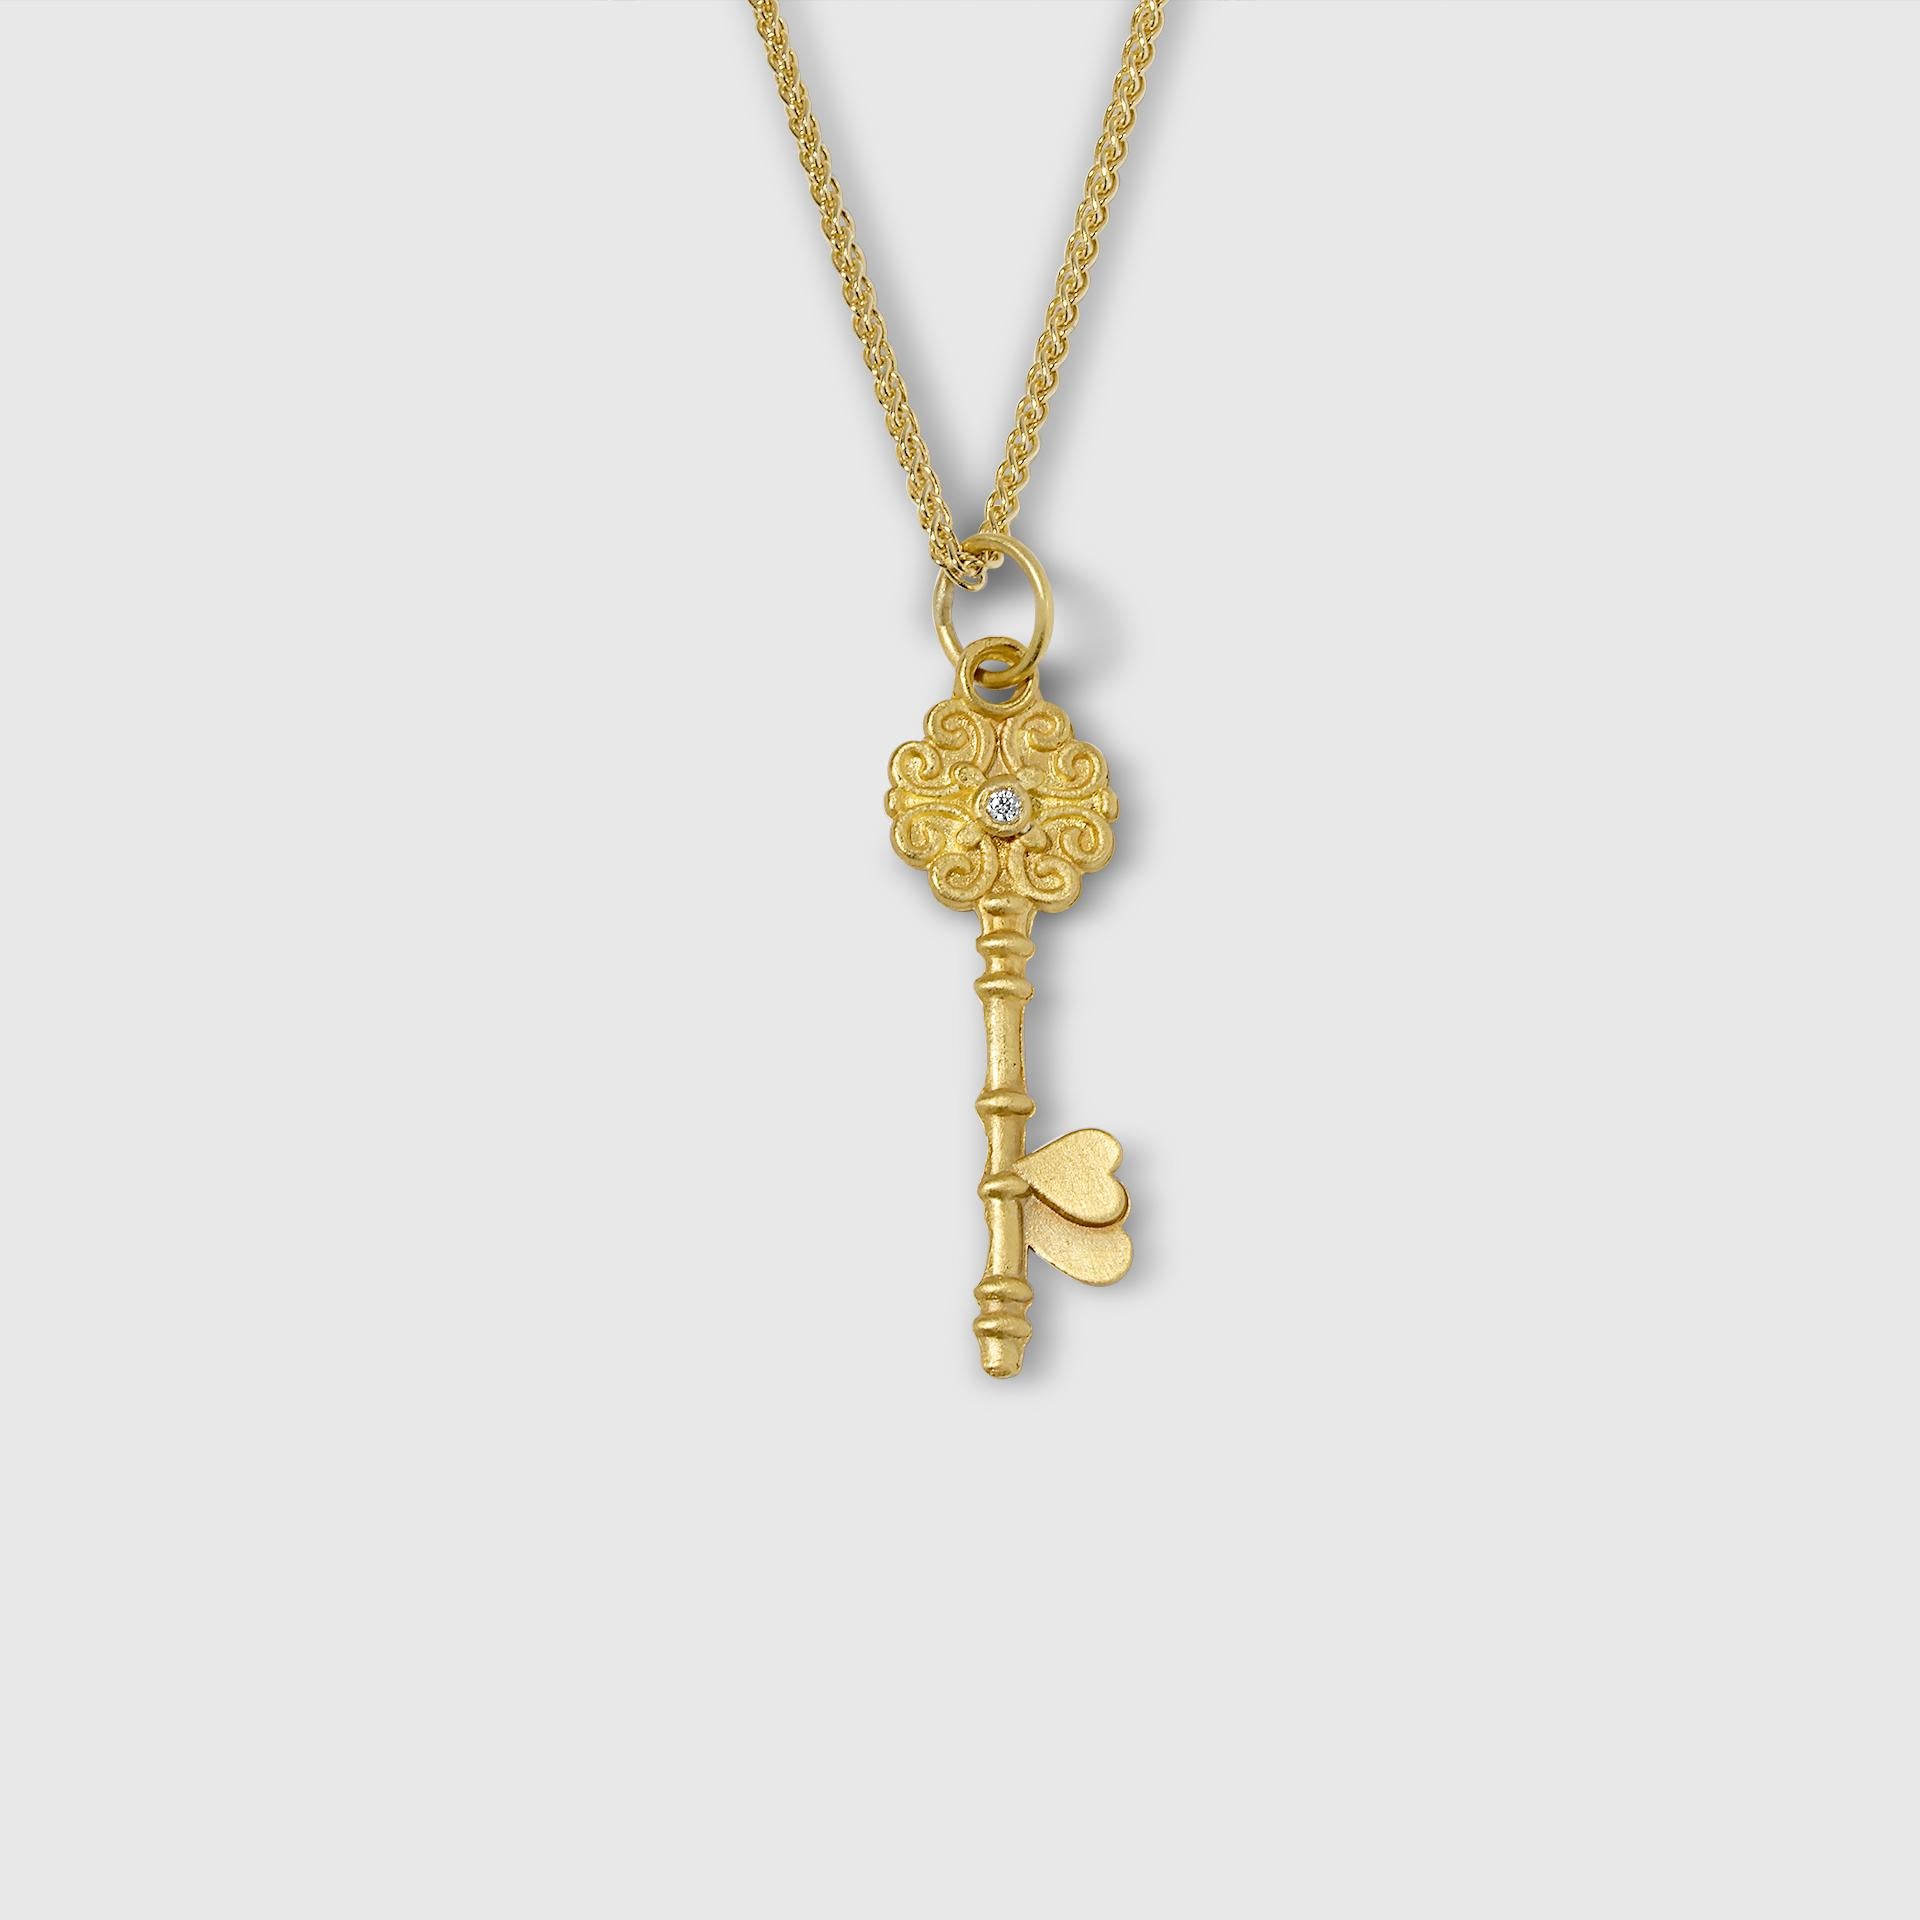 Round Cut Small Love Key Charm Pendant Necklace with Diamond, 24kt Solid Gold For Sale